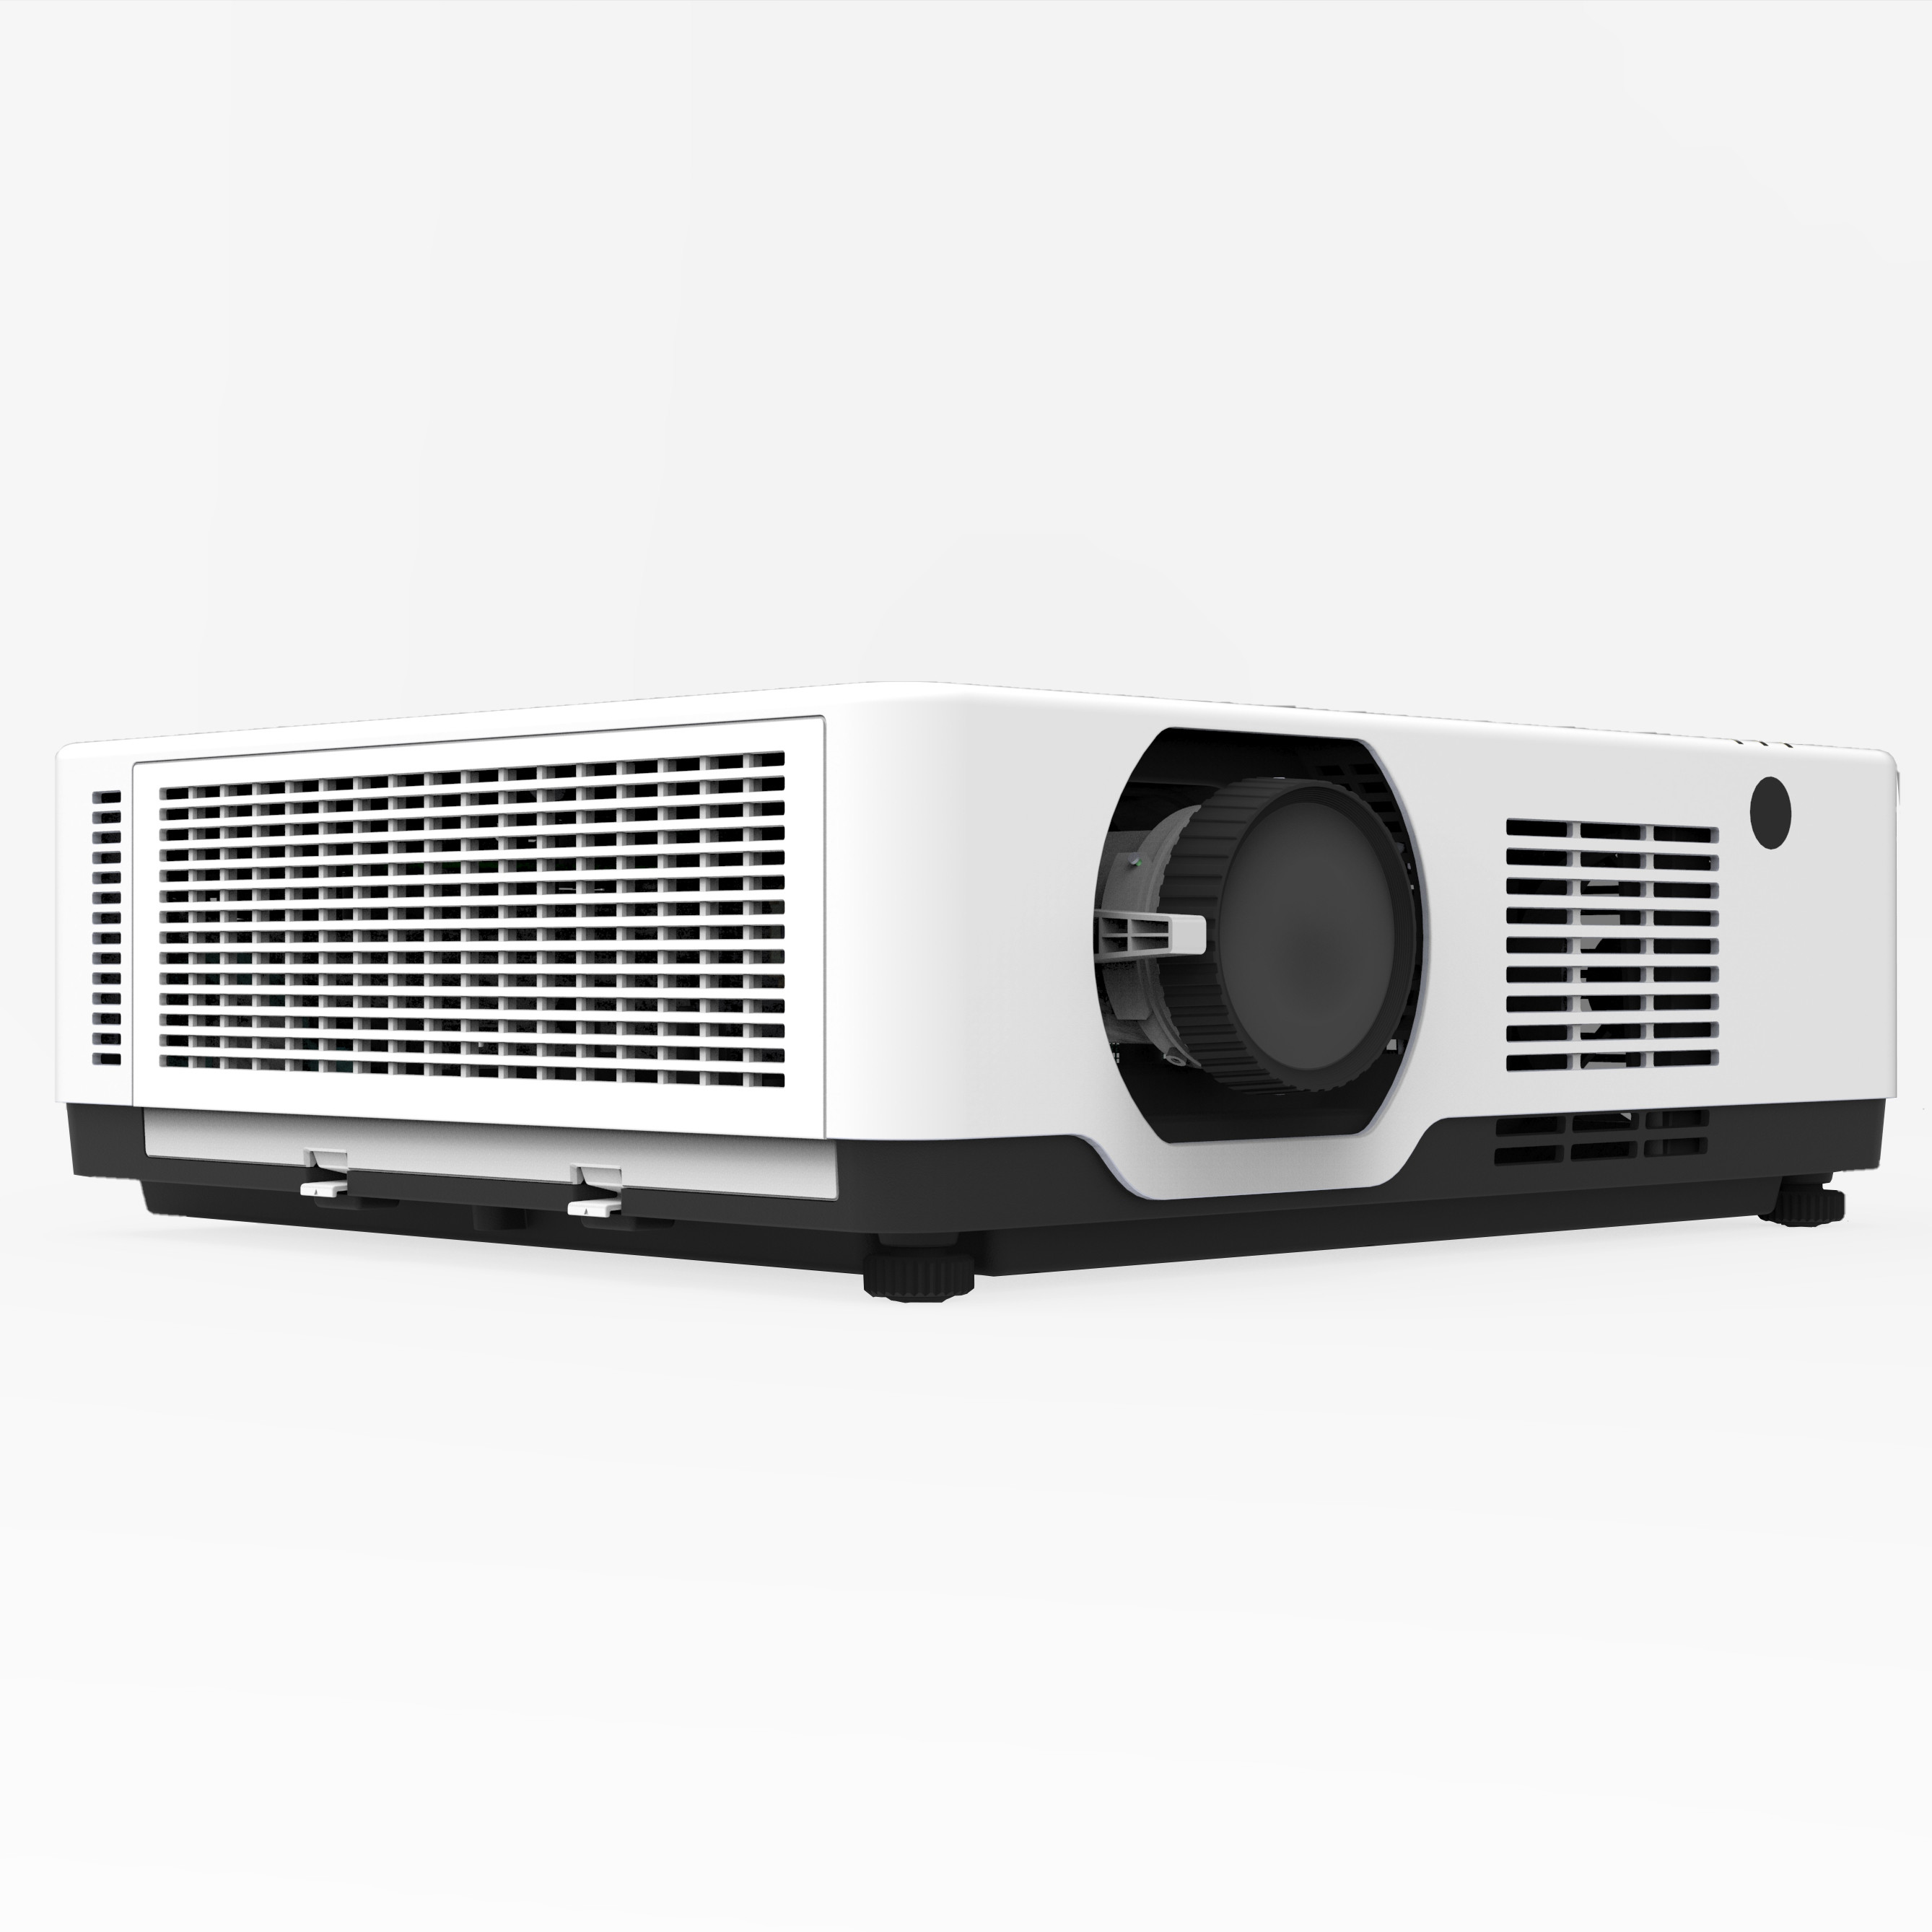 4K 3LCD Video Educational Projector 5500 Lumen For Outdoor Classroom